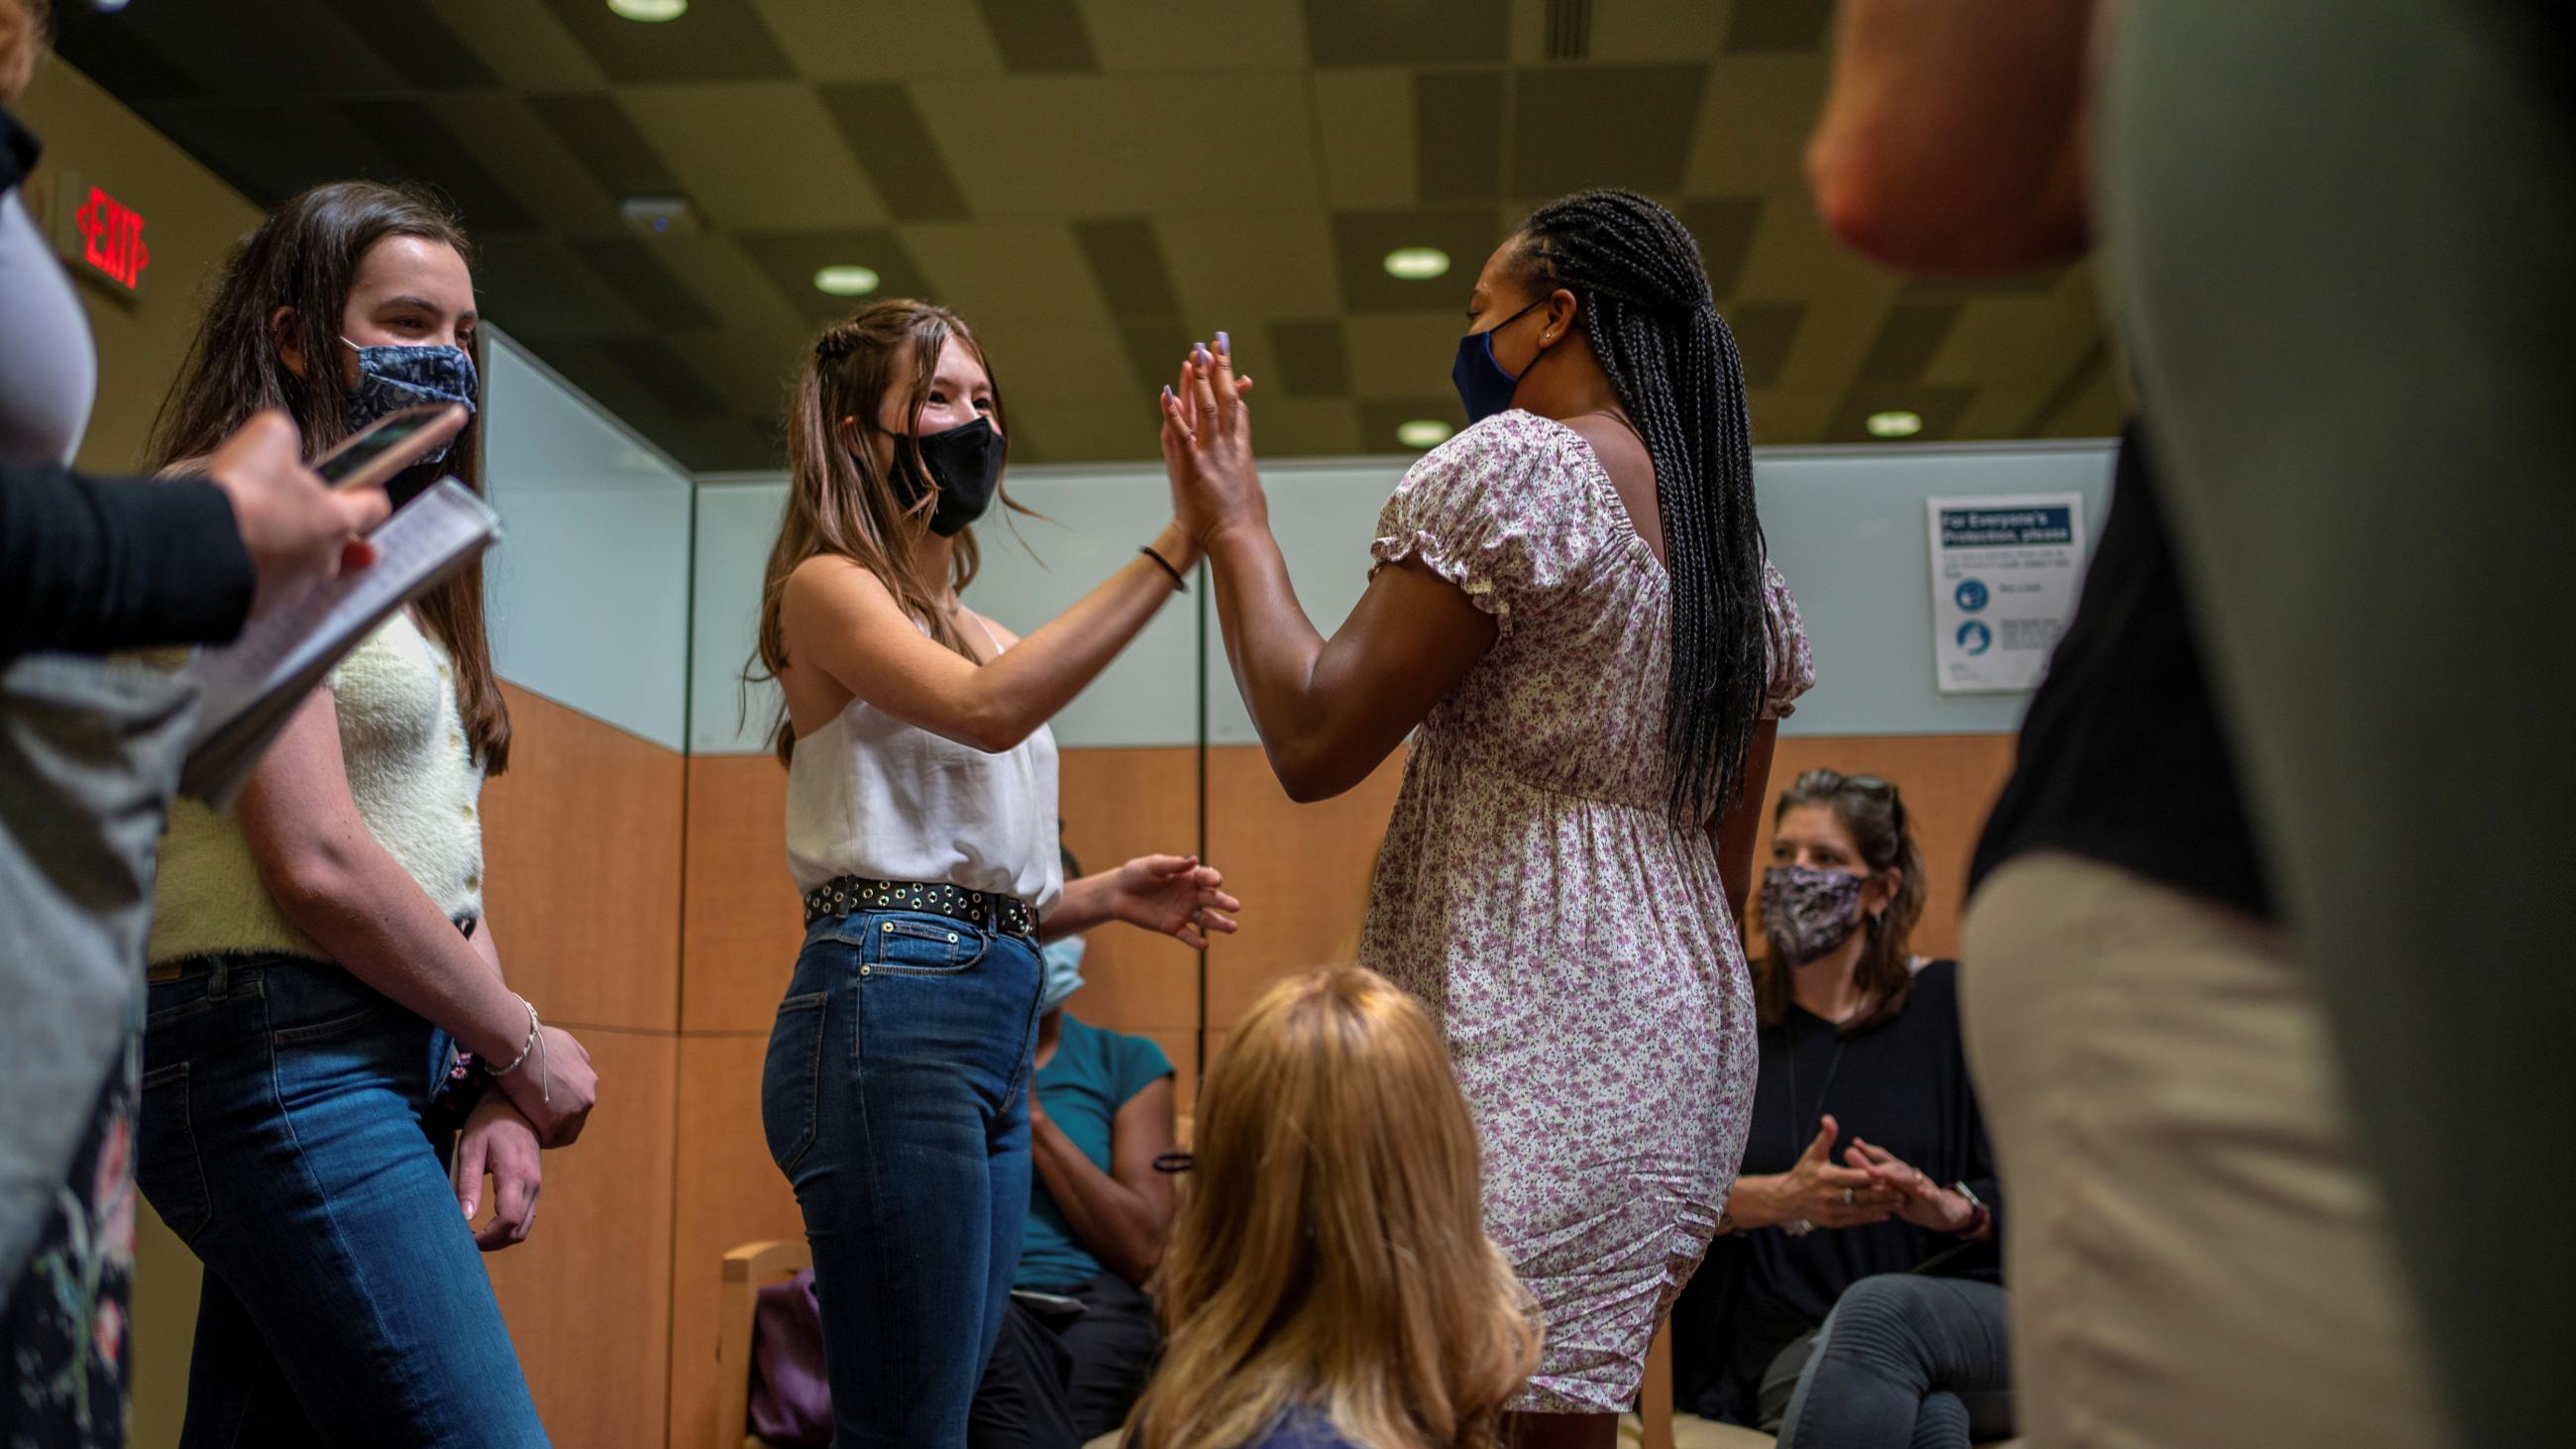 Teens  high five after Croix received her first COVID vaccine at the Ochsner Center for Primary Care and Wellness, in New Orleans, Louisiana, May 13, 2021.